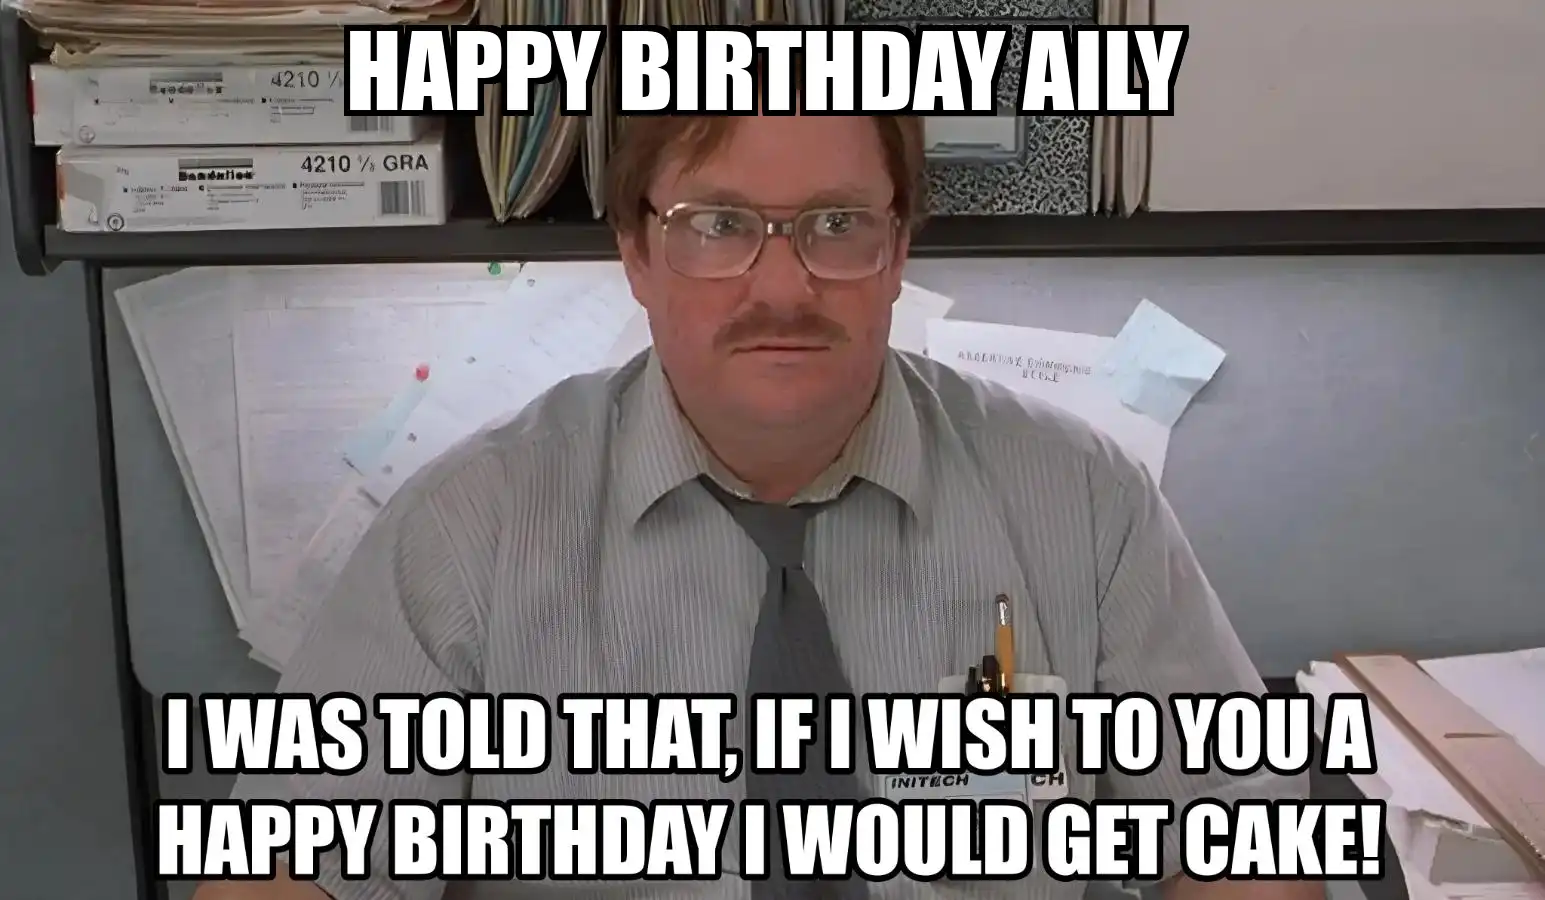 Happy Birthday Aily I Would Get A Cake Meme